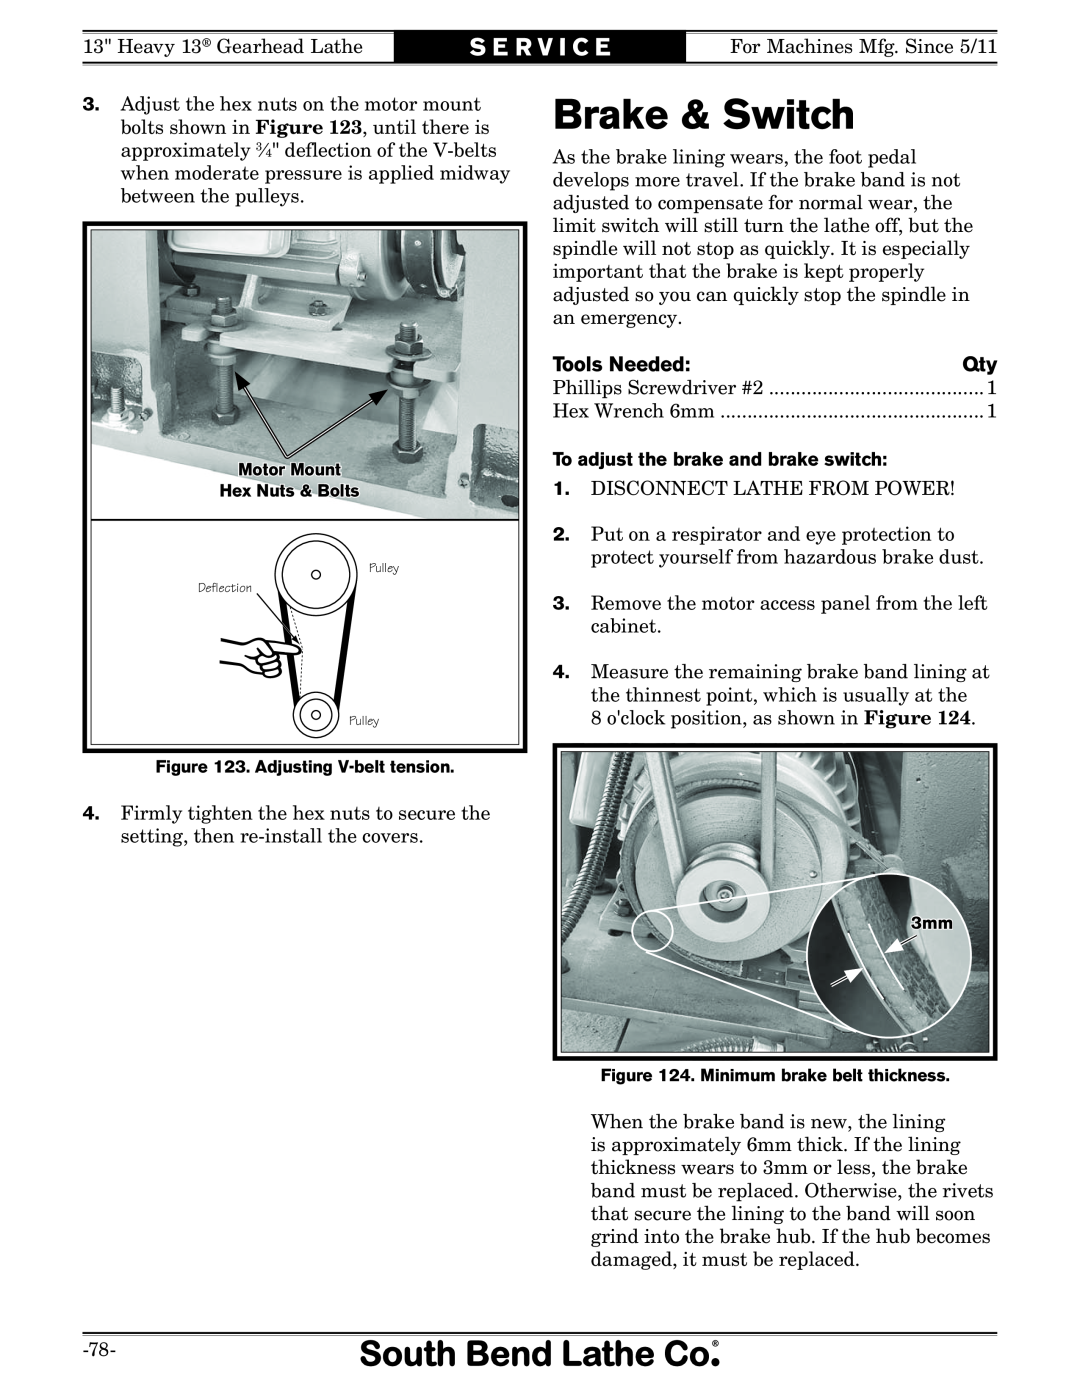 Southbend SB owner manual Brake & Switch, To adjust the brake and brake switch, S E R V I C E, Tools Needed 